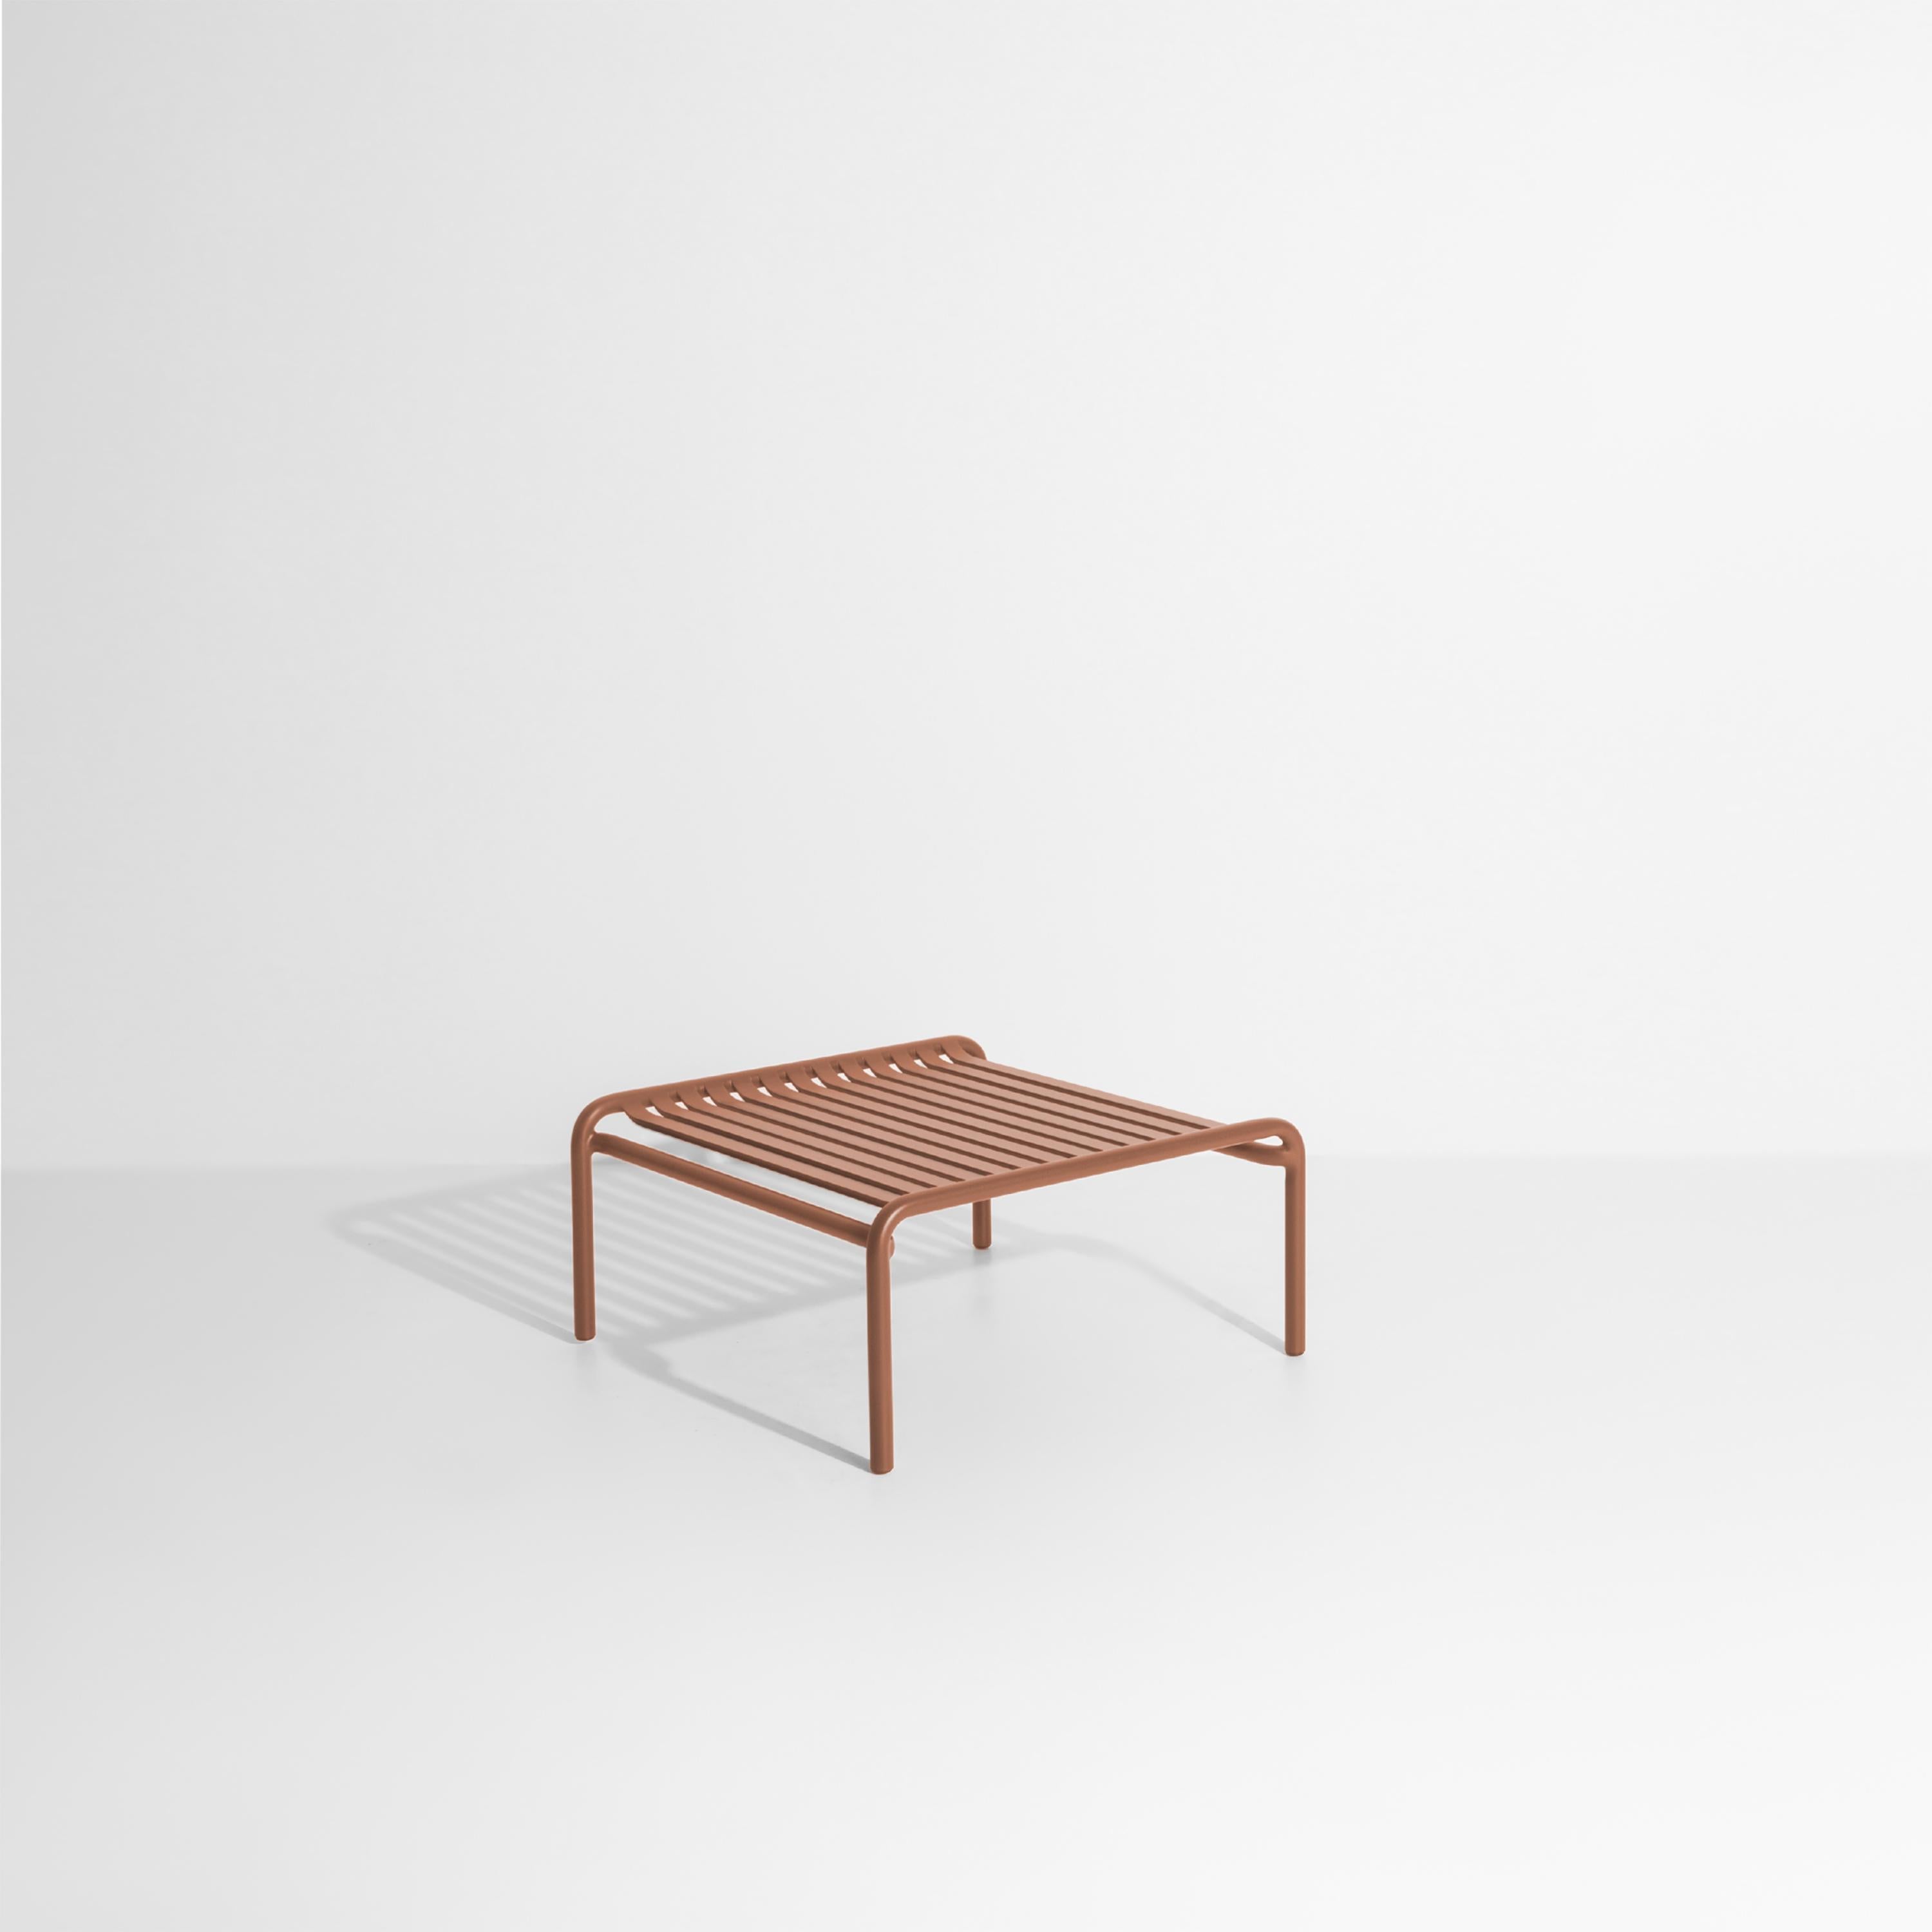 Petite Friture Week-End Coffee Table in Terracotta Aluminium by Studio BrichetZiegler, 2017

The week-end collection is a full range of outdoor furniture, in aluminium grained epoxy paint, matt finish, that includes 18 functions and 8 colours for